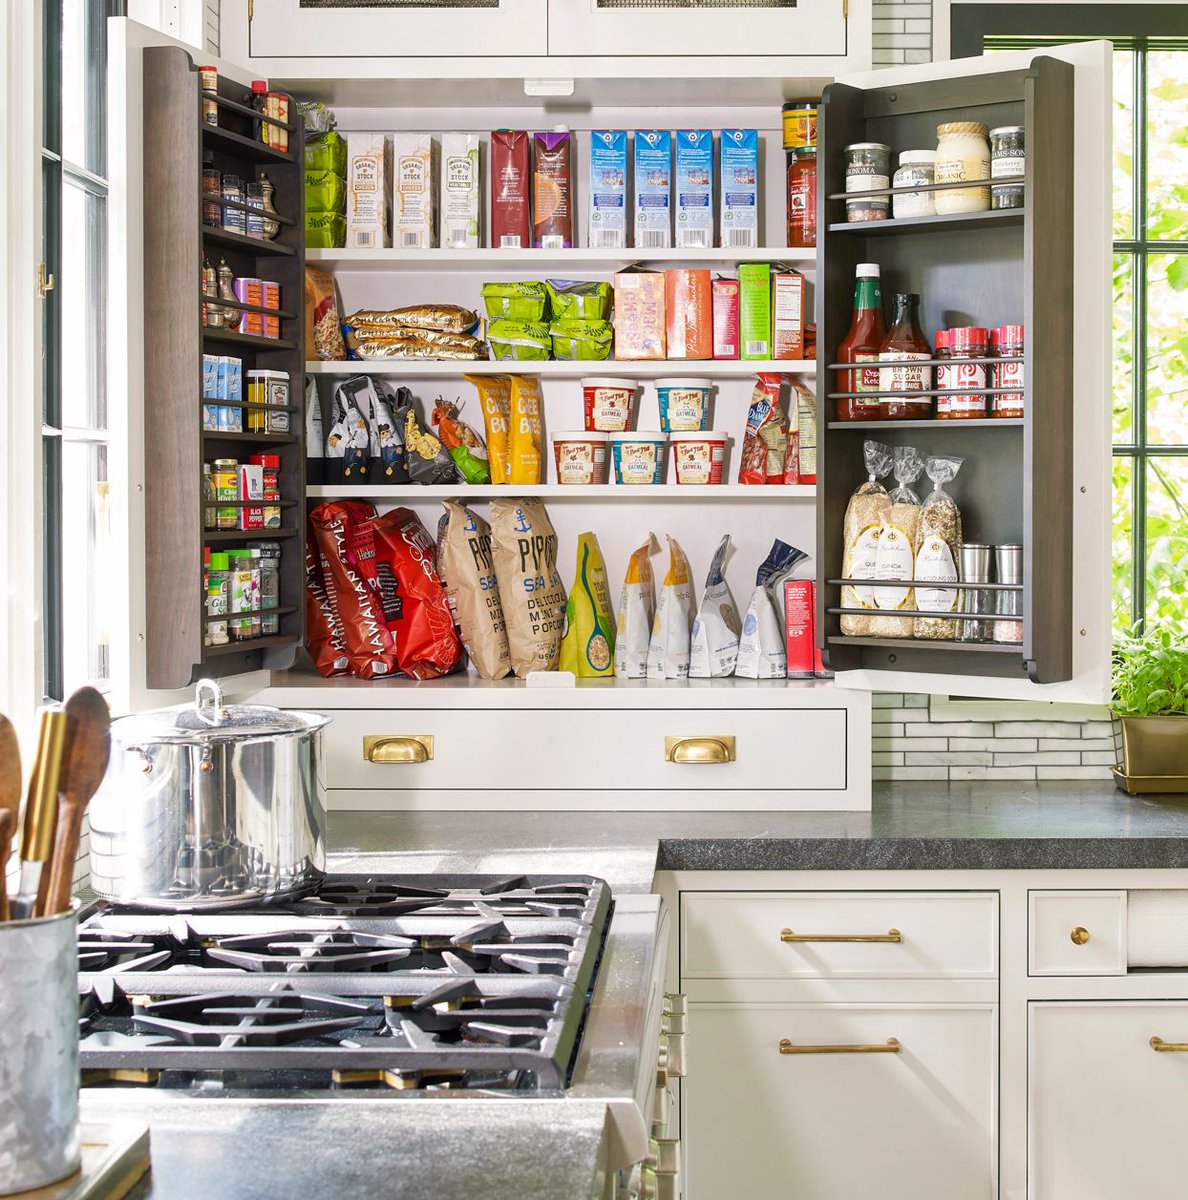 Here are a few kitchen organization tips to get your home ready for summer!

- Declutter
- Categorize
- Use storage containers
- Maximize cabinet space
- Drawer dividers
- Install hooks and racks

#kitchen #kitchenhacks #kitchendesign #kitchenorganizer #kitchenorganizing